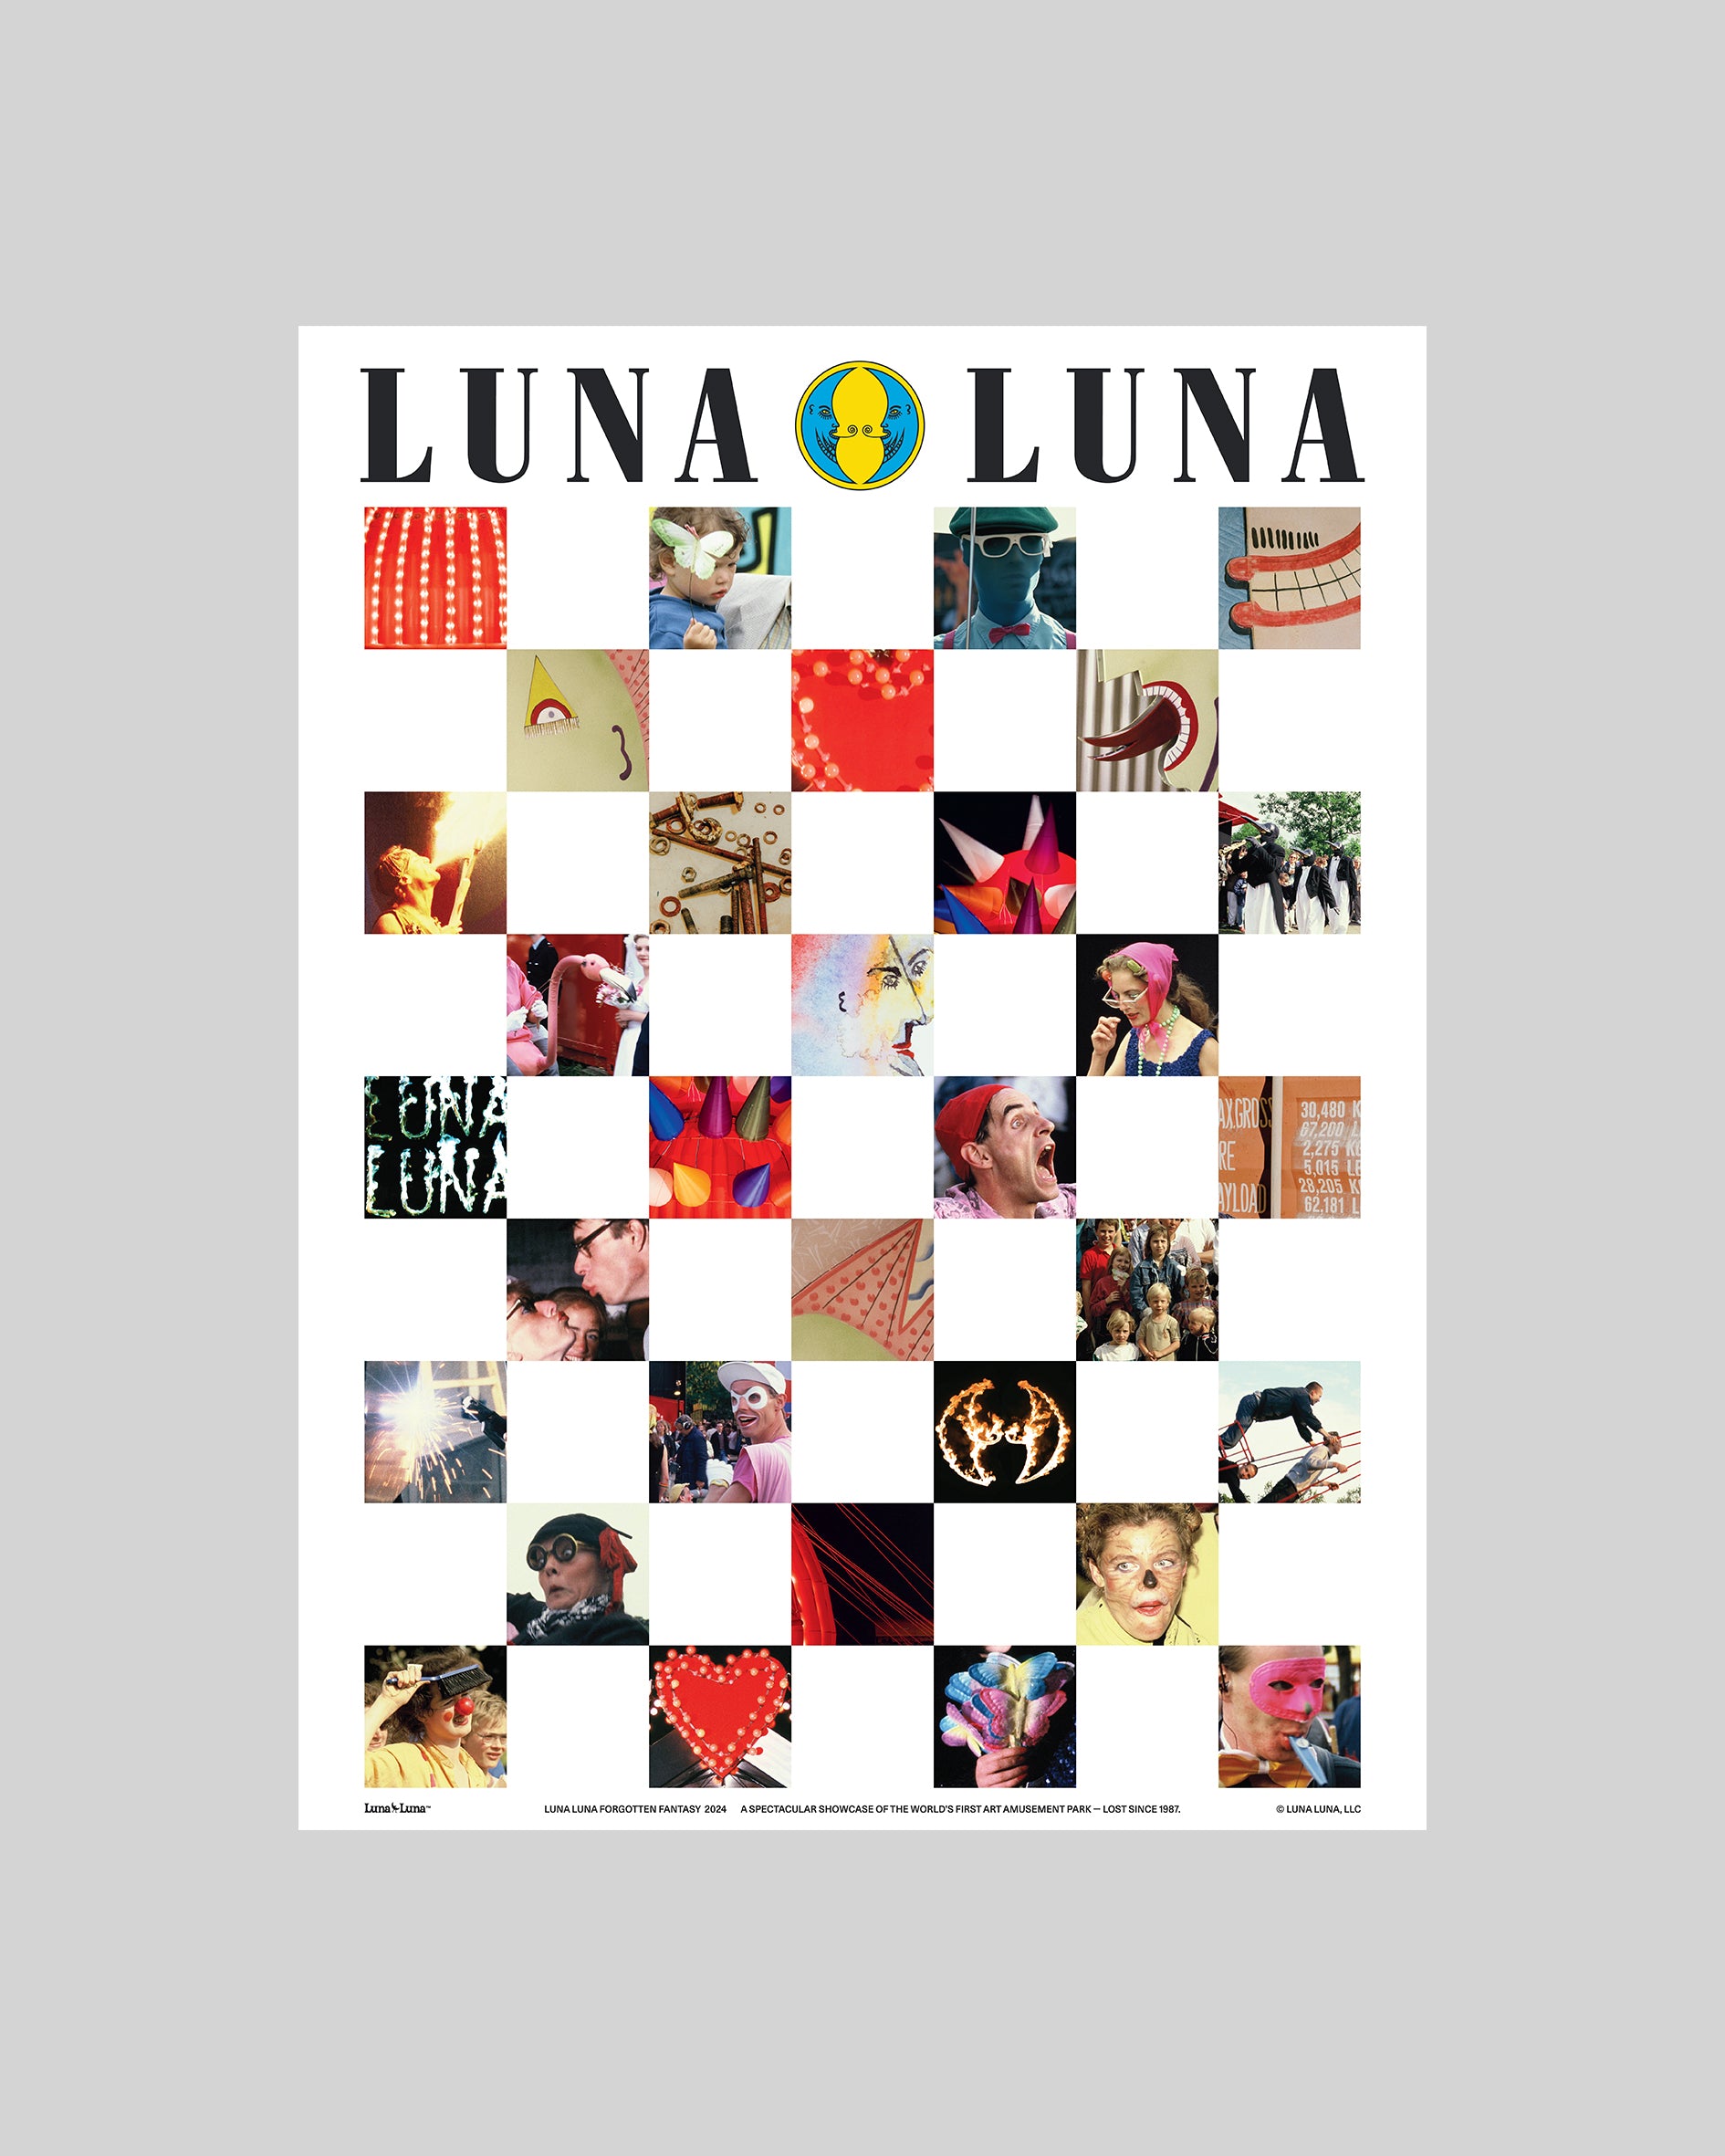 1987 Faces Poster. Square archive photographs laid in a checkered pattern on a white poster with the Luna Luna logo at the top. 18 inches wide by 24 inches tall.